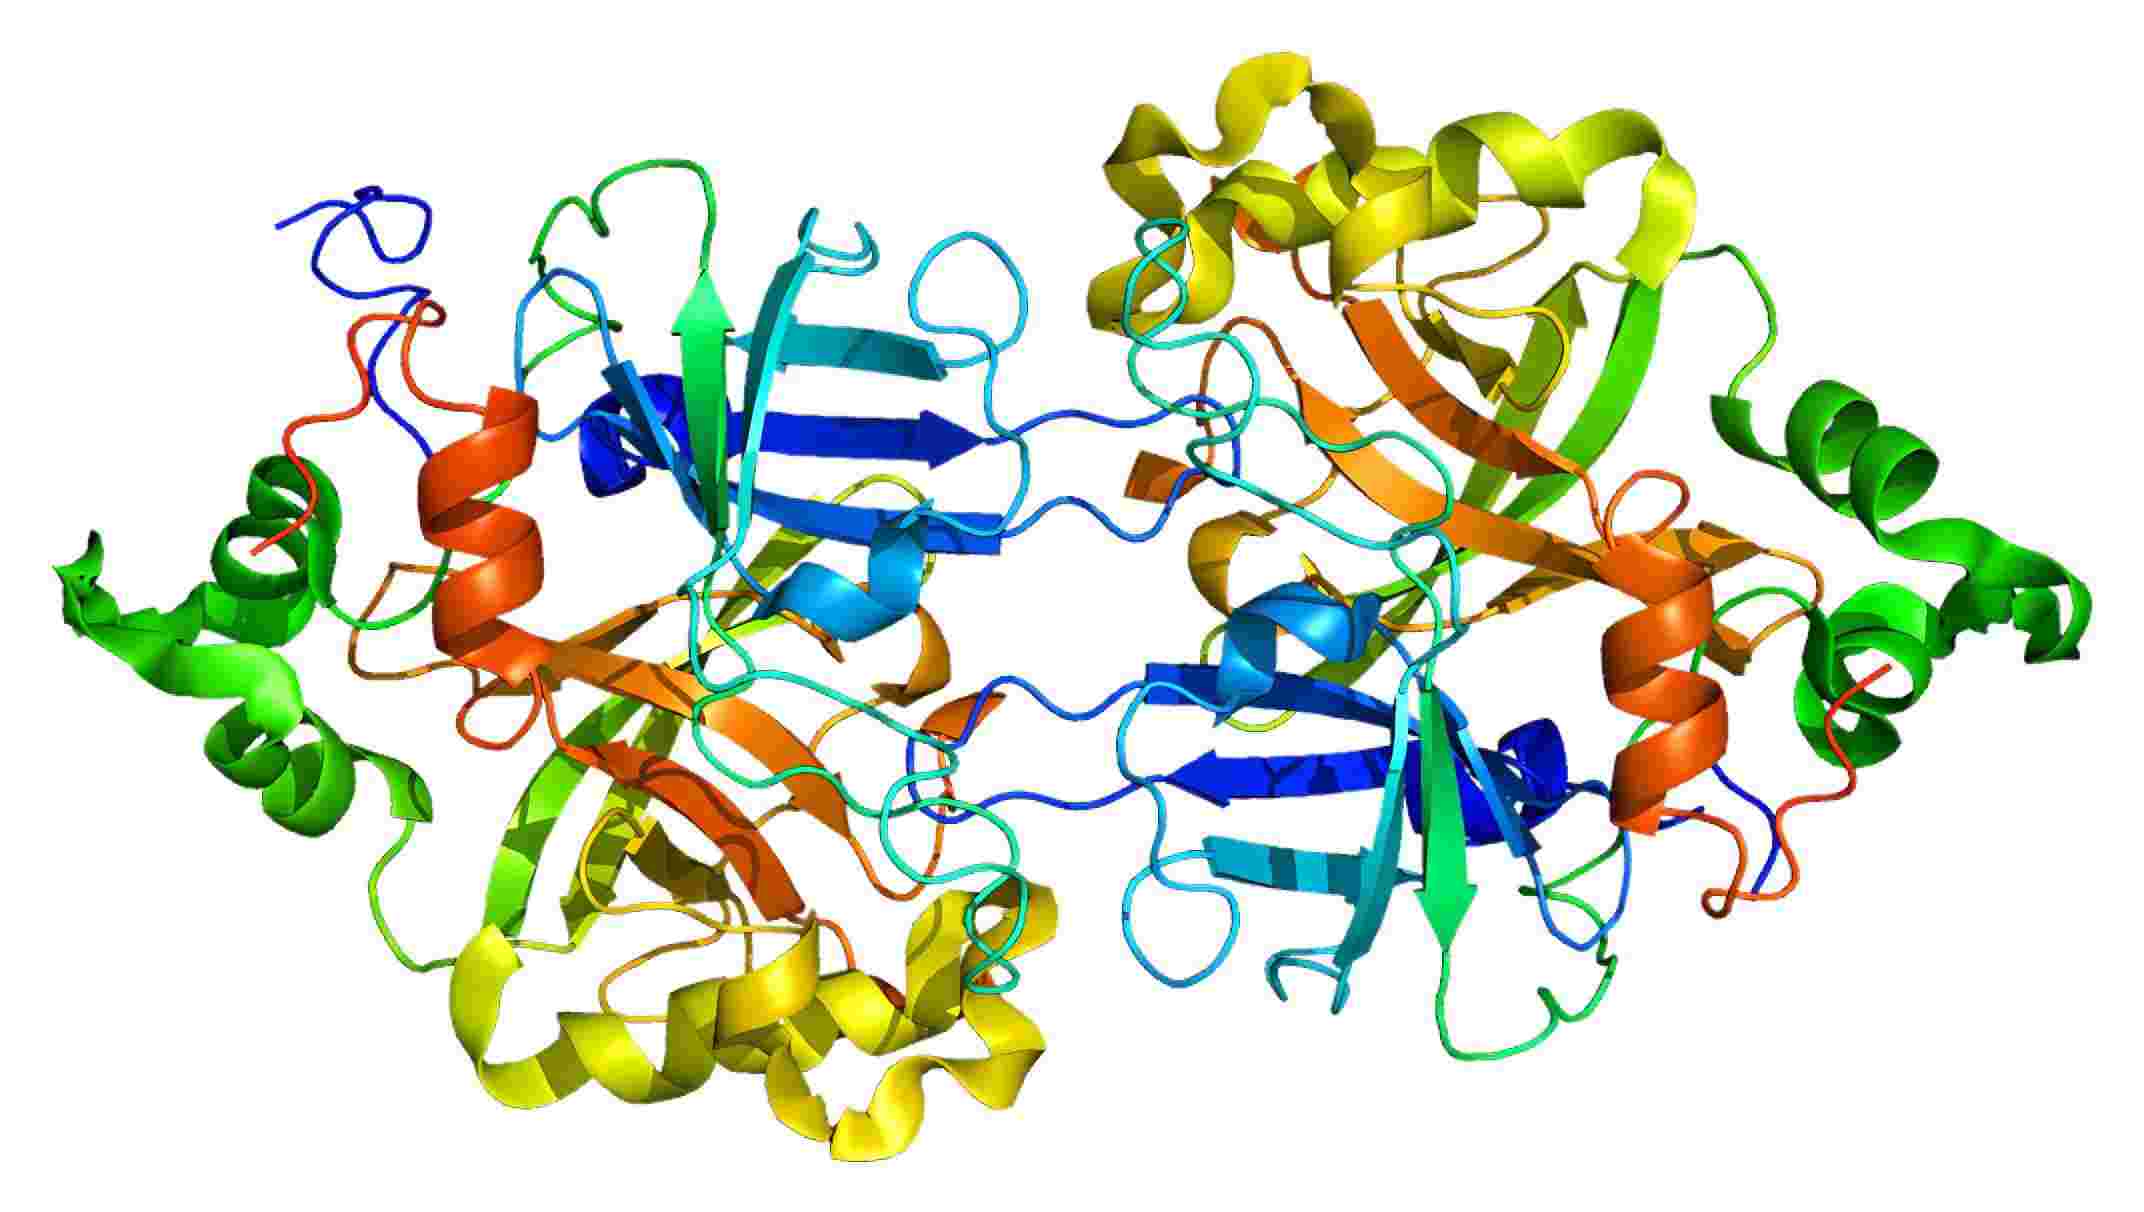 Fig. 1 Structure of factor B. （By Emw - Own work, https://commons.wikimedia.org/wiki/File:Protein_CFB_PDB_1dle.png)